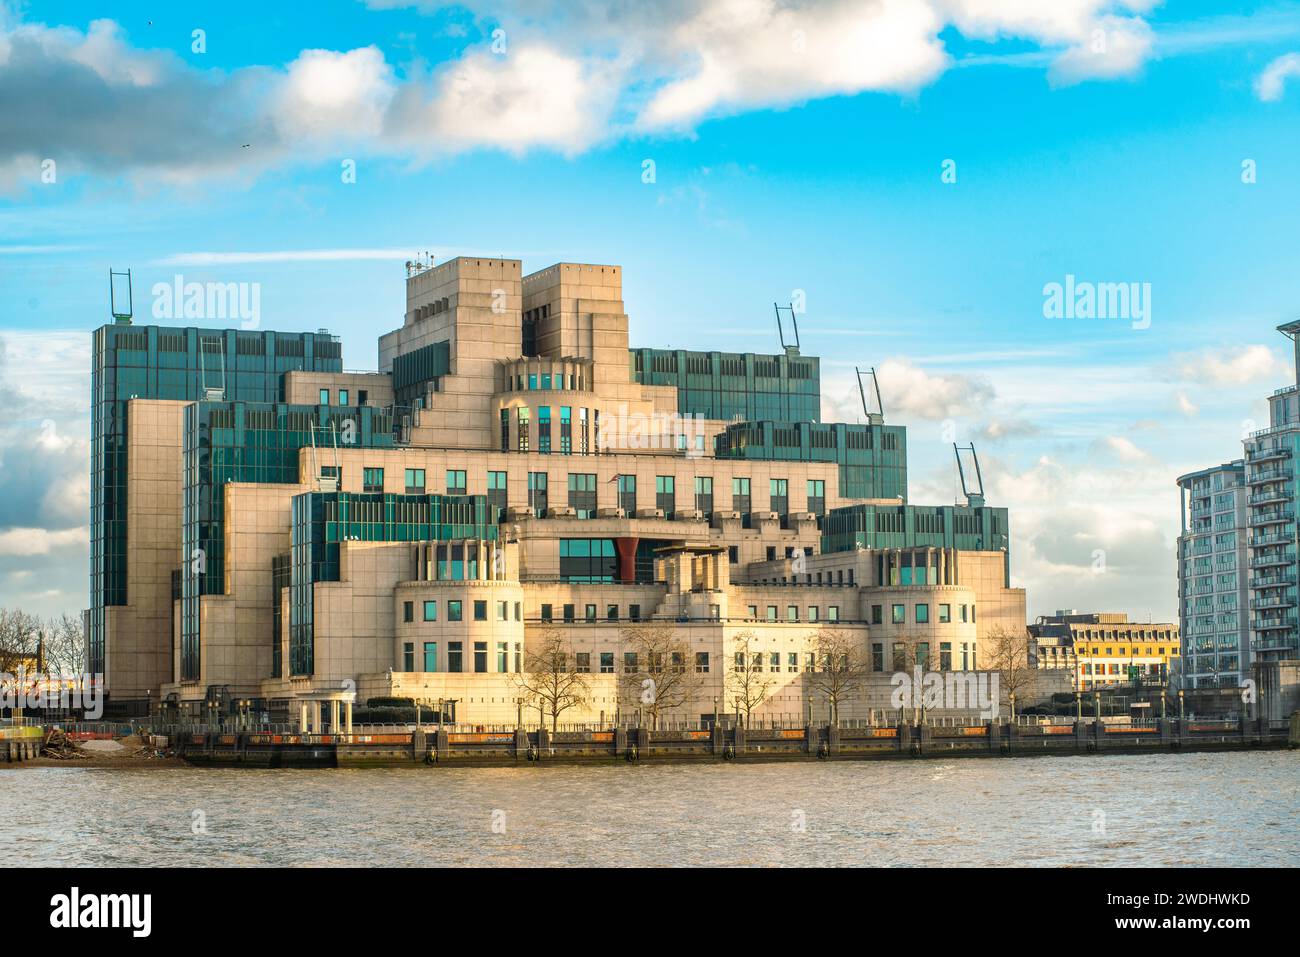 The SIS Building, also called the MI6 Building, at Vauxhall Cross houses the headquarters of the Secret Intelligence Service Stock Photo